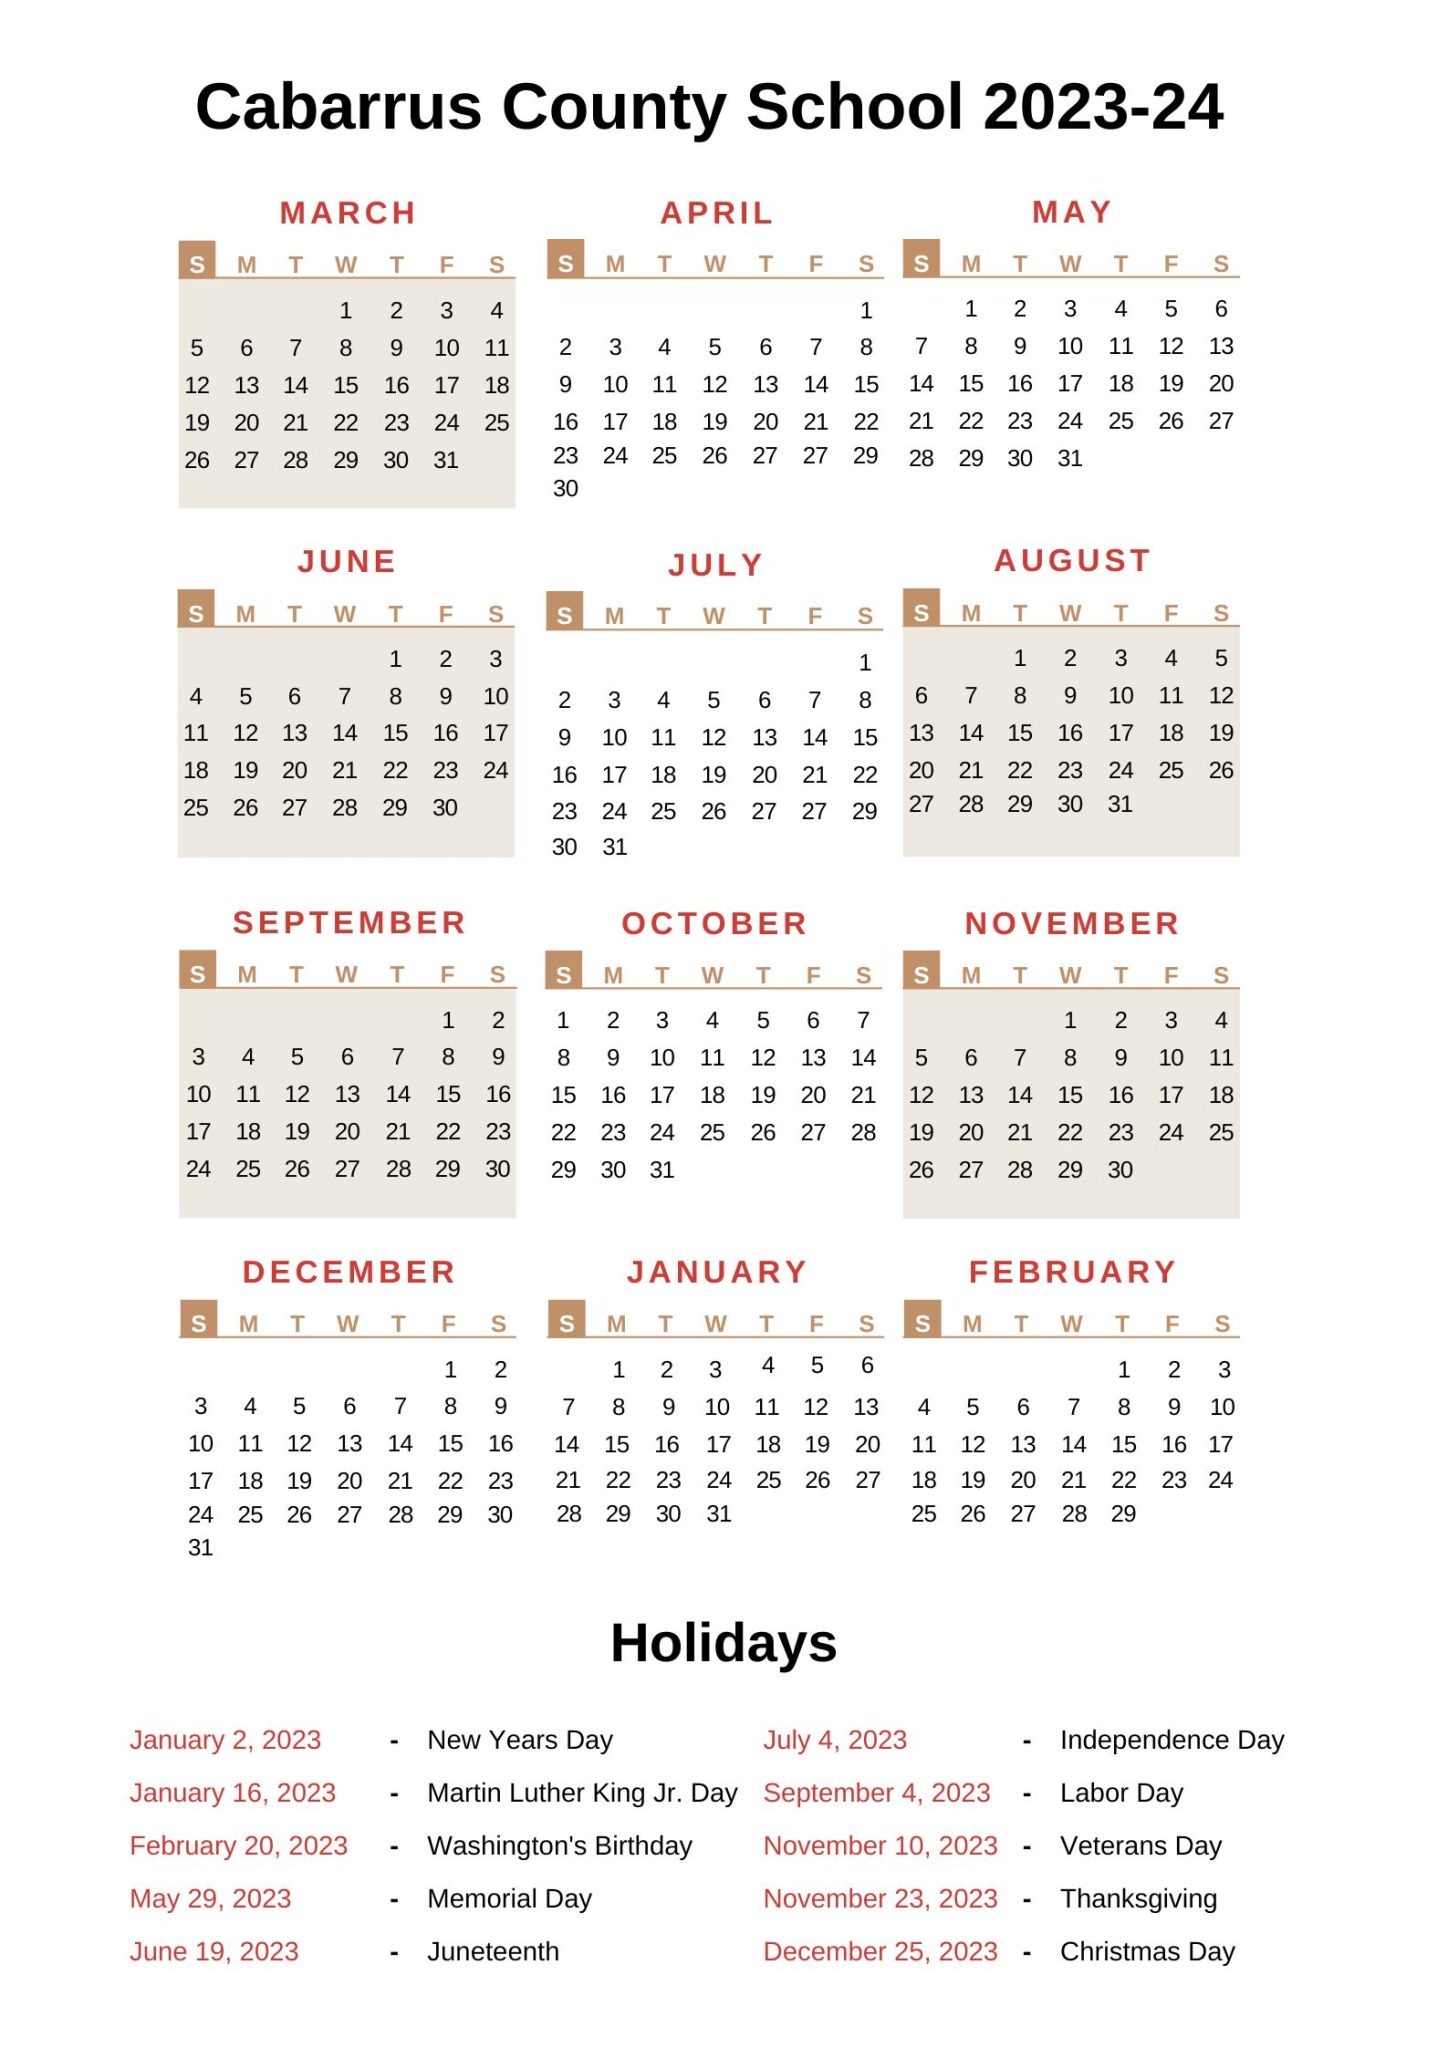 Cabarrus County Schools Calendar 202324 with Holidays